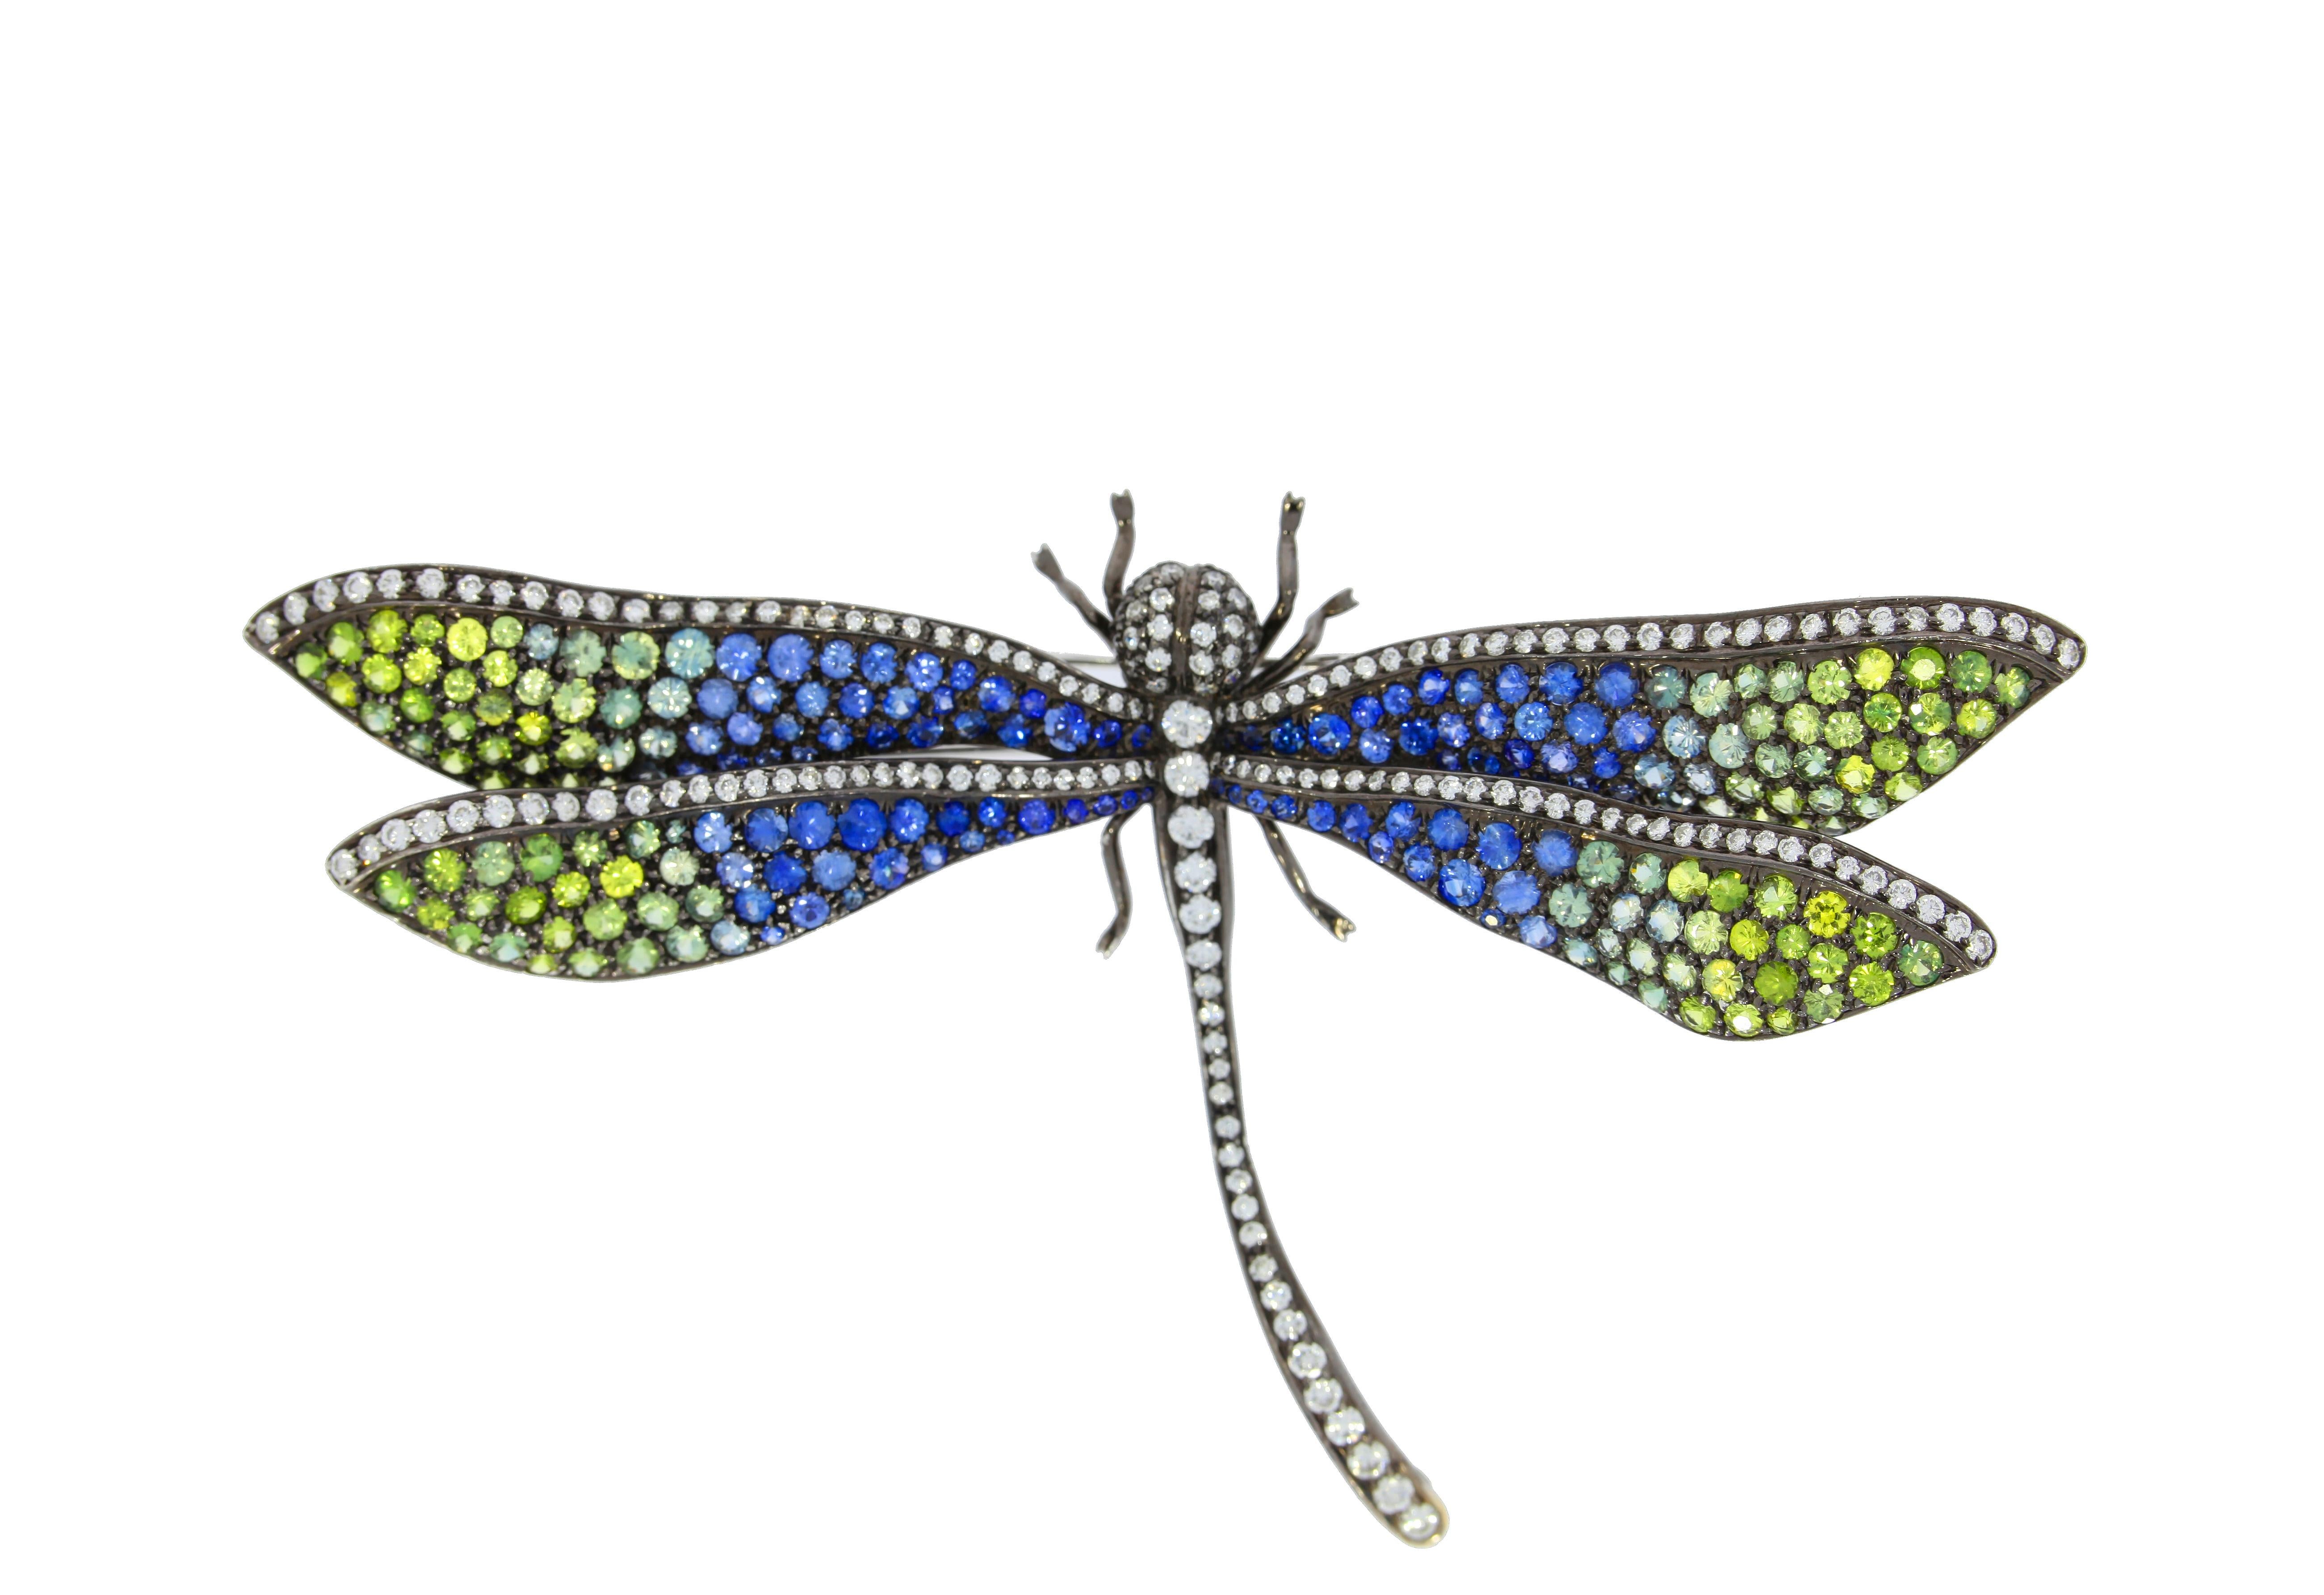 This delightful gemstone brooch in the form of a dragonfly, is beautifully decorated with multicolored sapphires on the wings. The head and tail are enhanced with a row of sparkling white diamonds. Will add conversation-starting style to any outfit.